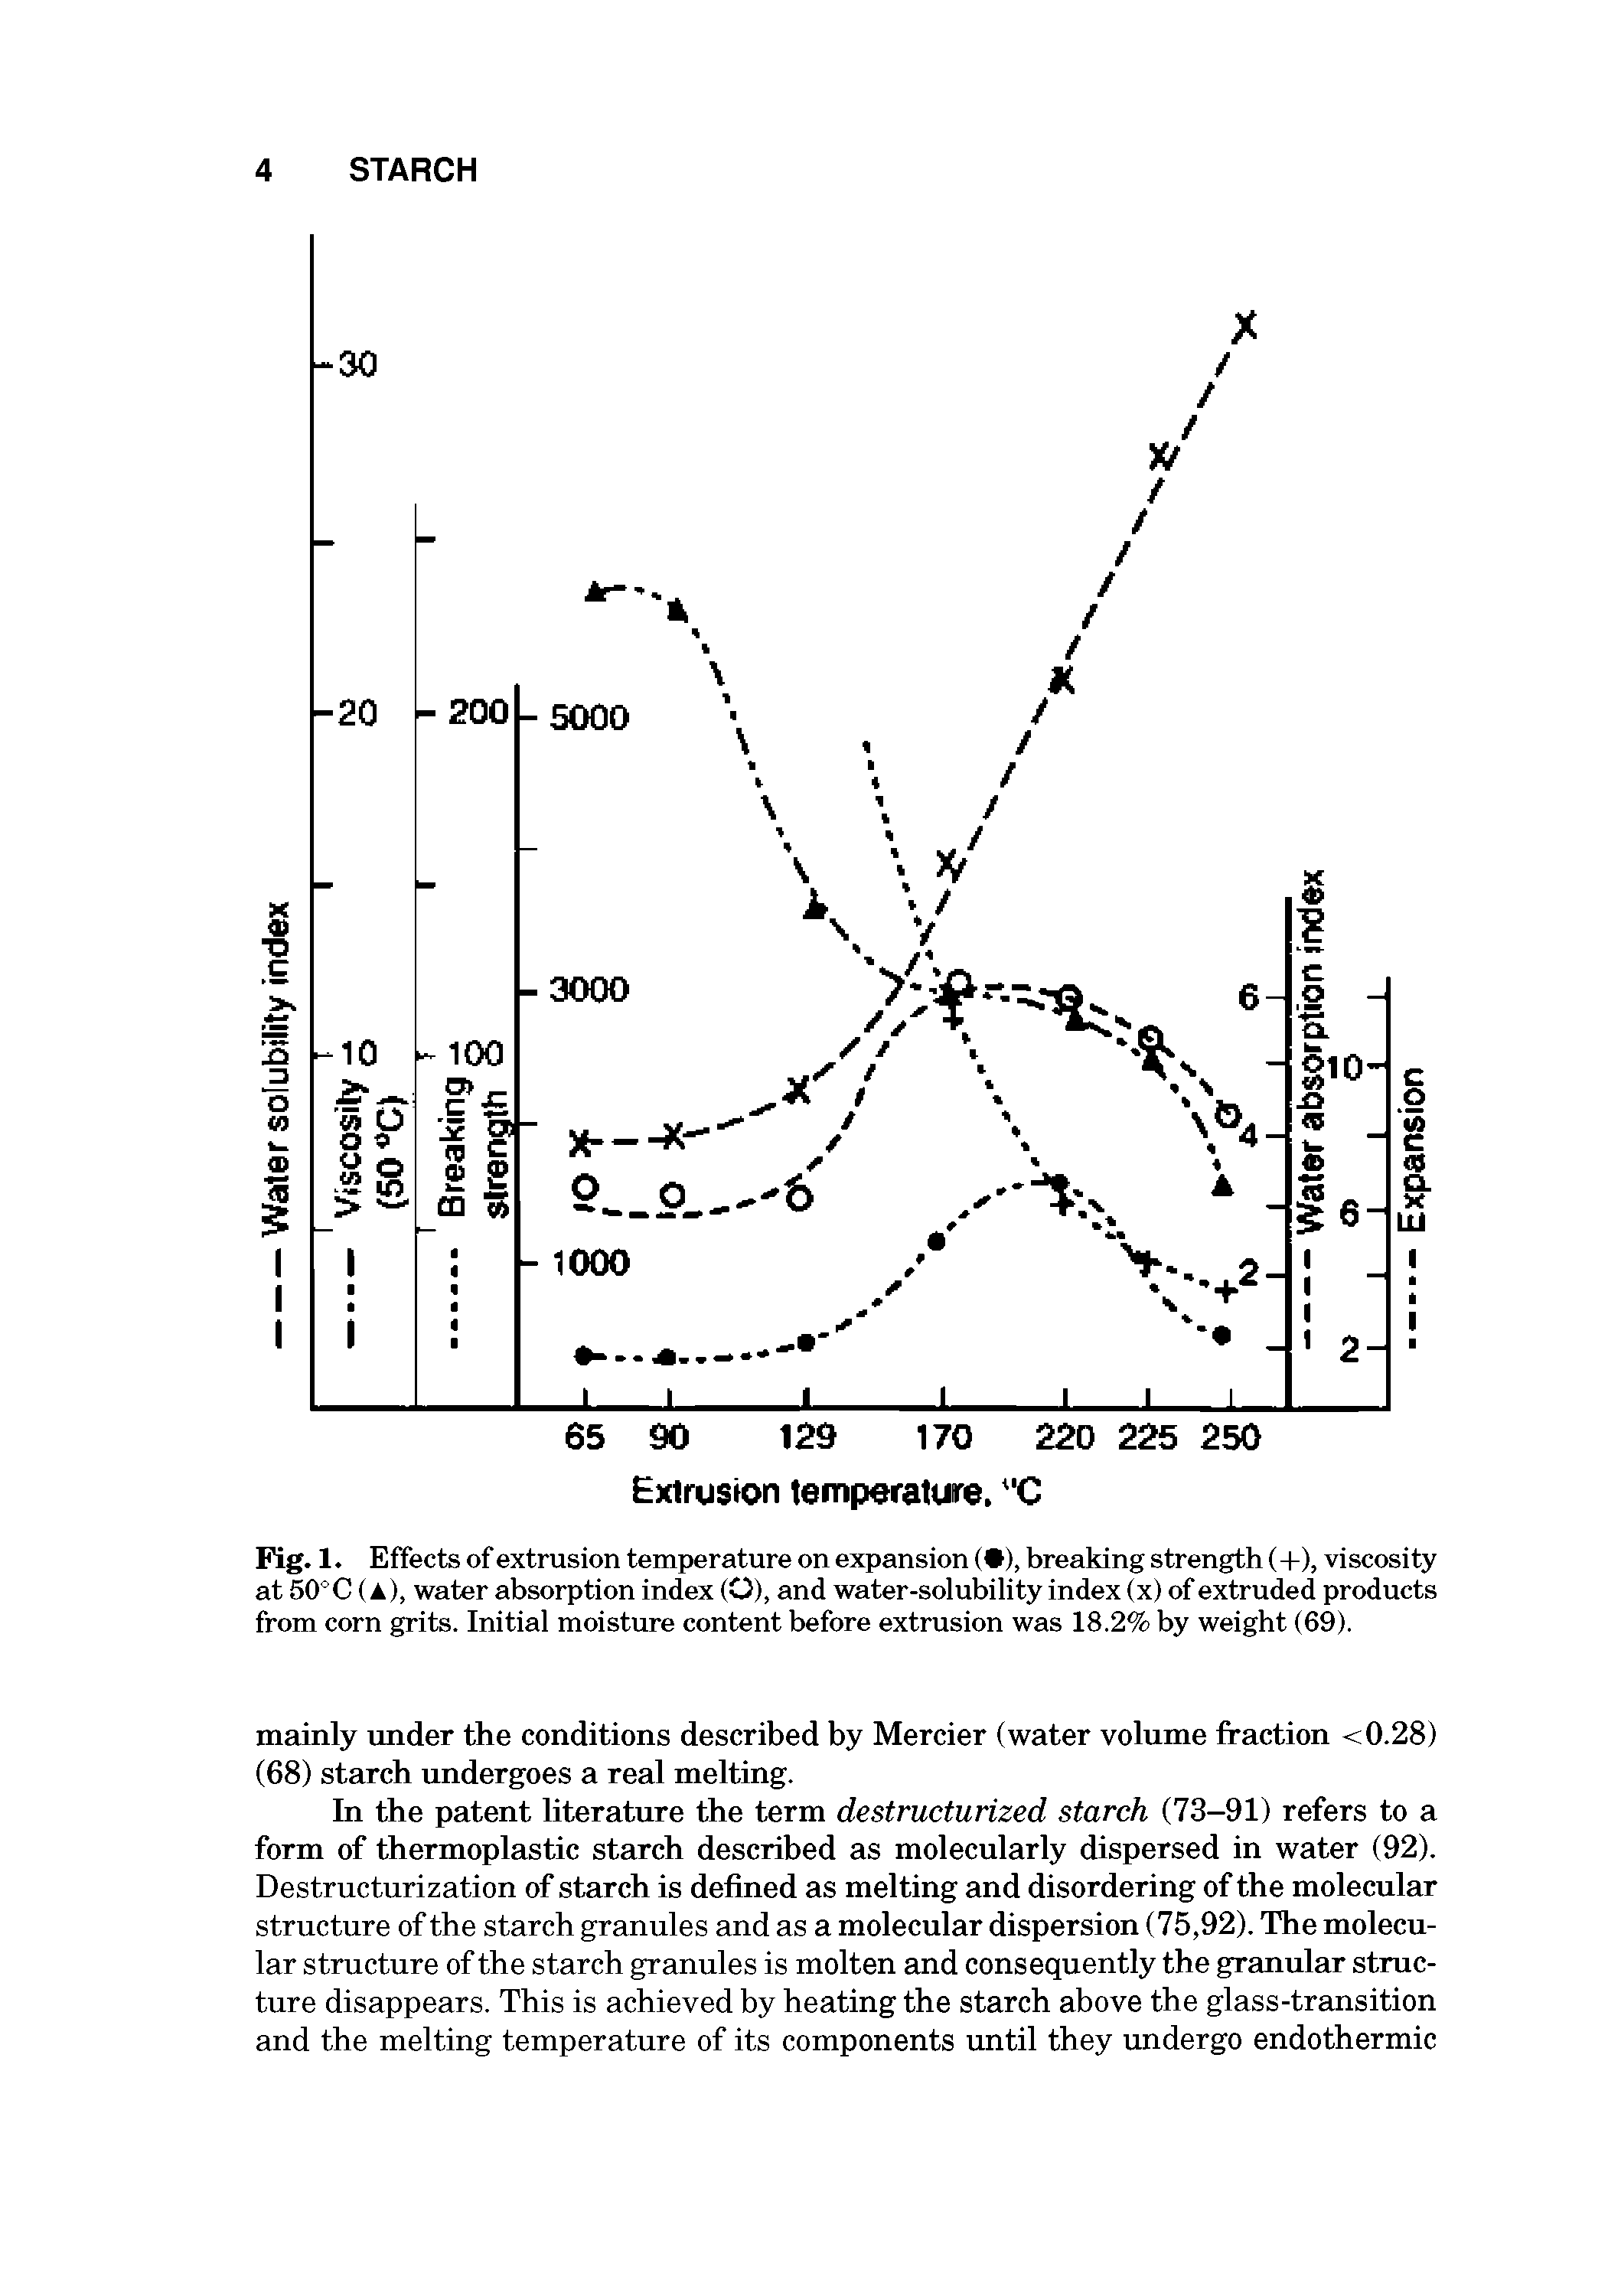 Fig. 1. Effects of extrusion temperature on expansion ( ), breaking strength (+), viscosity at 50°C (a), water absorption index (O), and water-solubility index (x) of extruded products from corn grits. Initial moisture content before extrusion was 18.2% by weight (69).